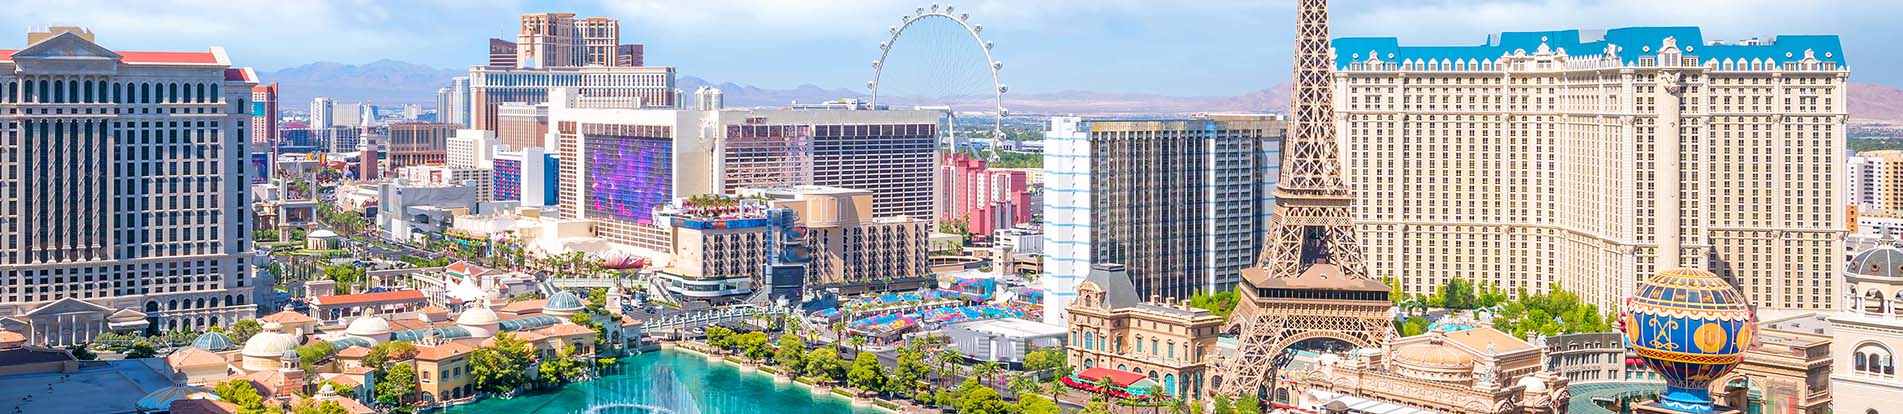 Hop On Cheap Flights To Las Vegas To Enjoy A Glam Glittery Vacation